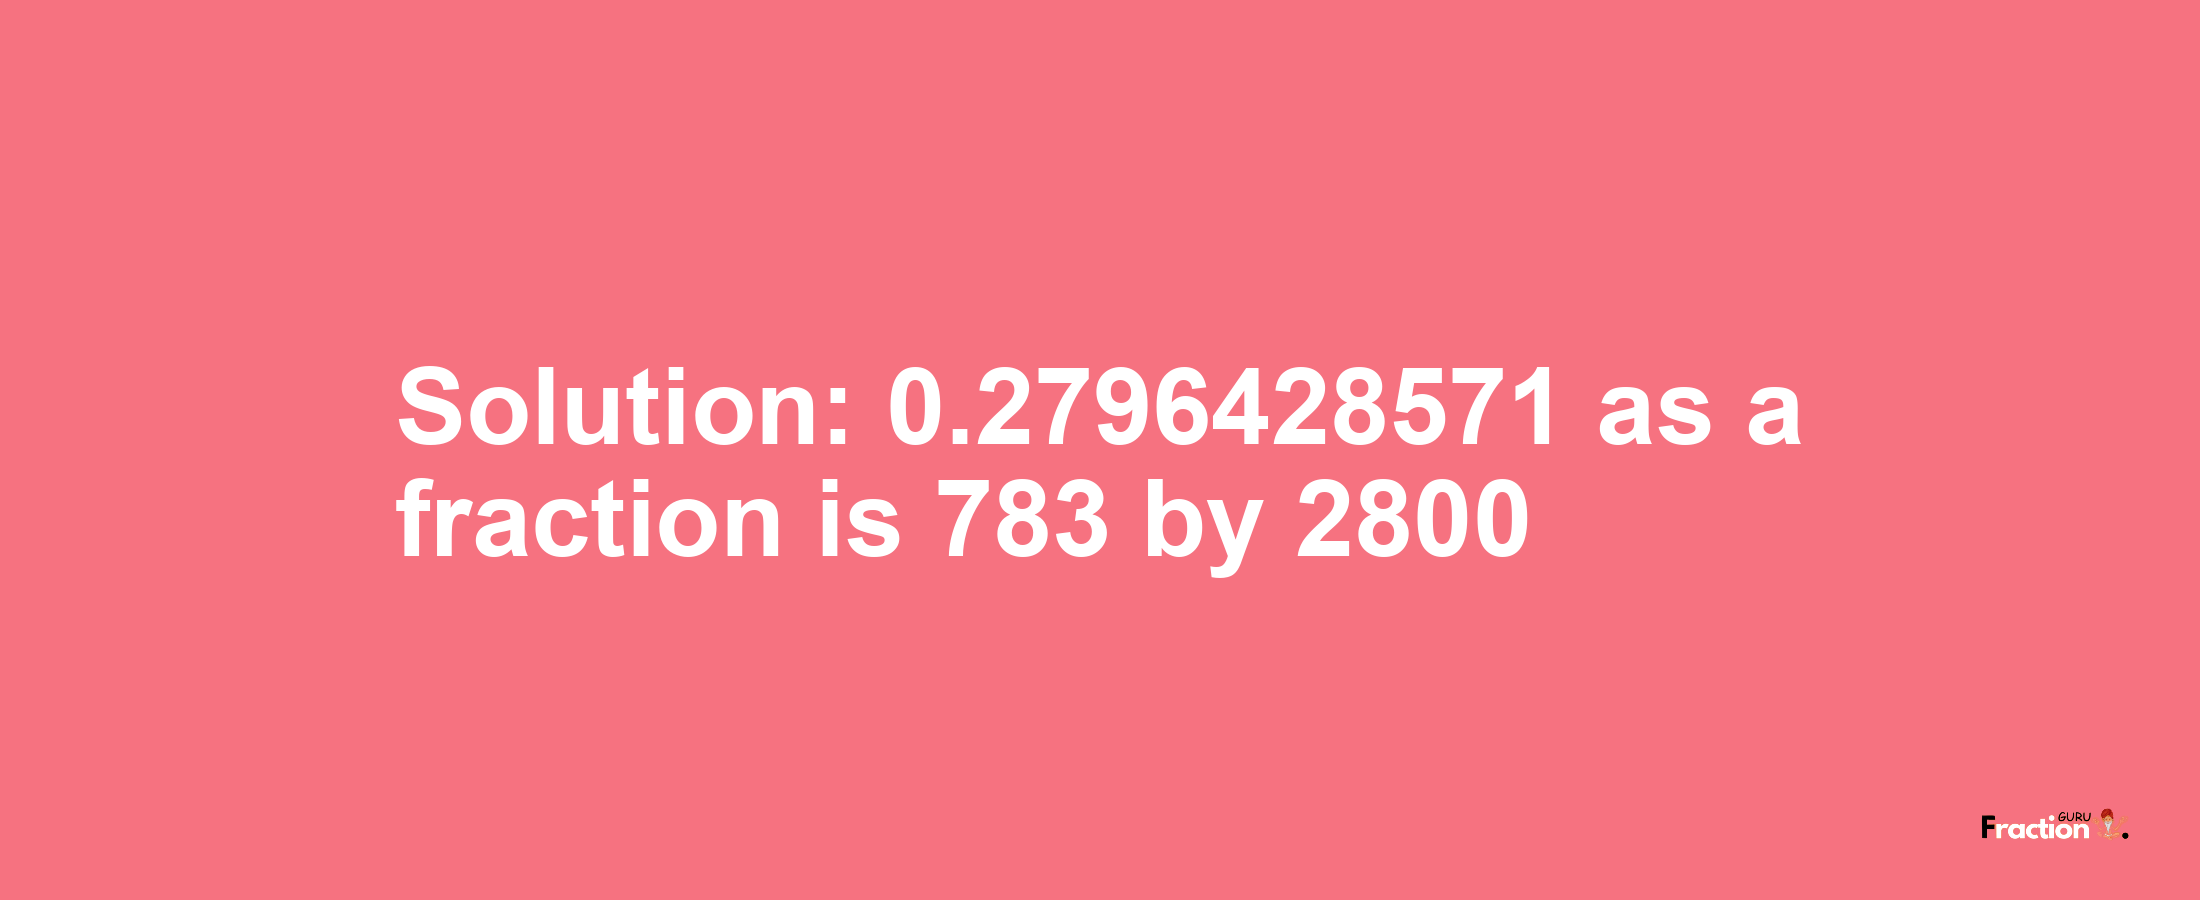 Solution:0.2796428571 as a fraction is 783/2800